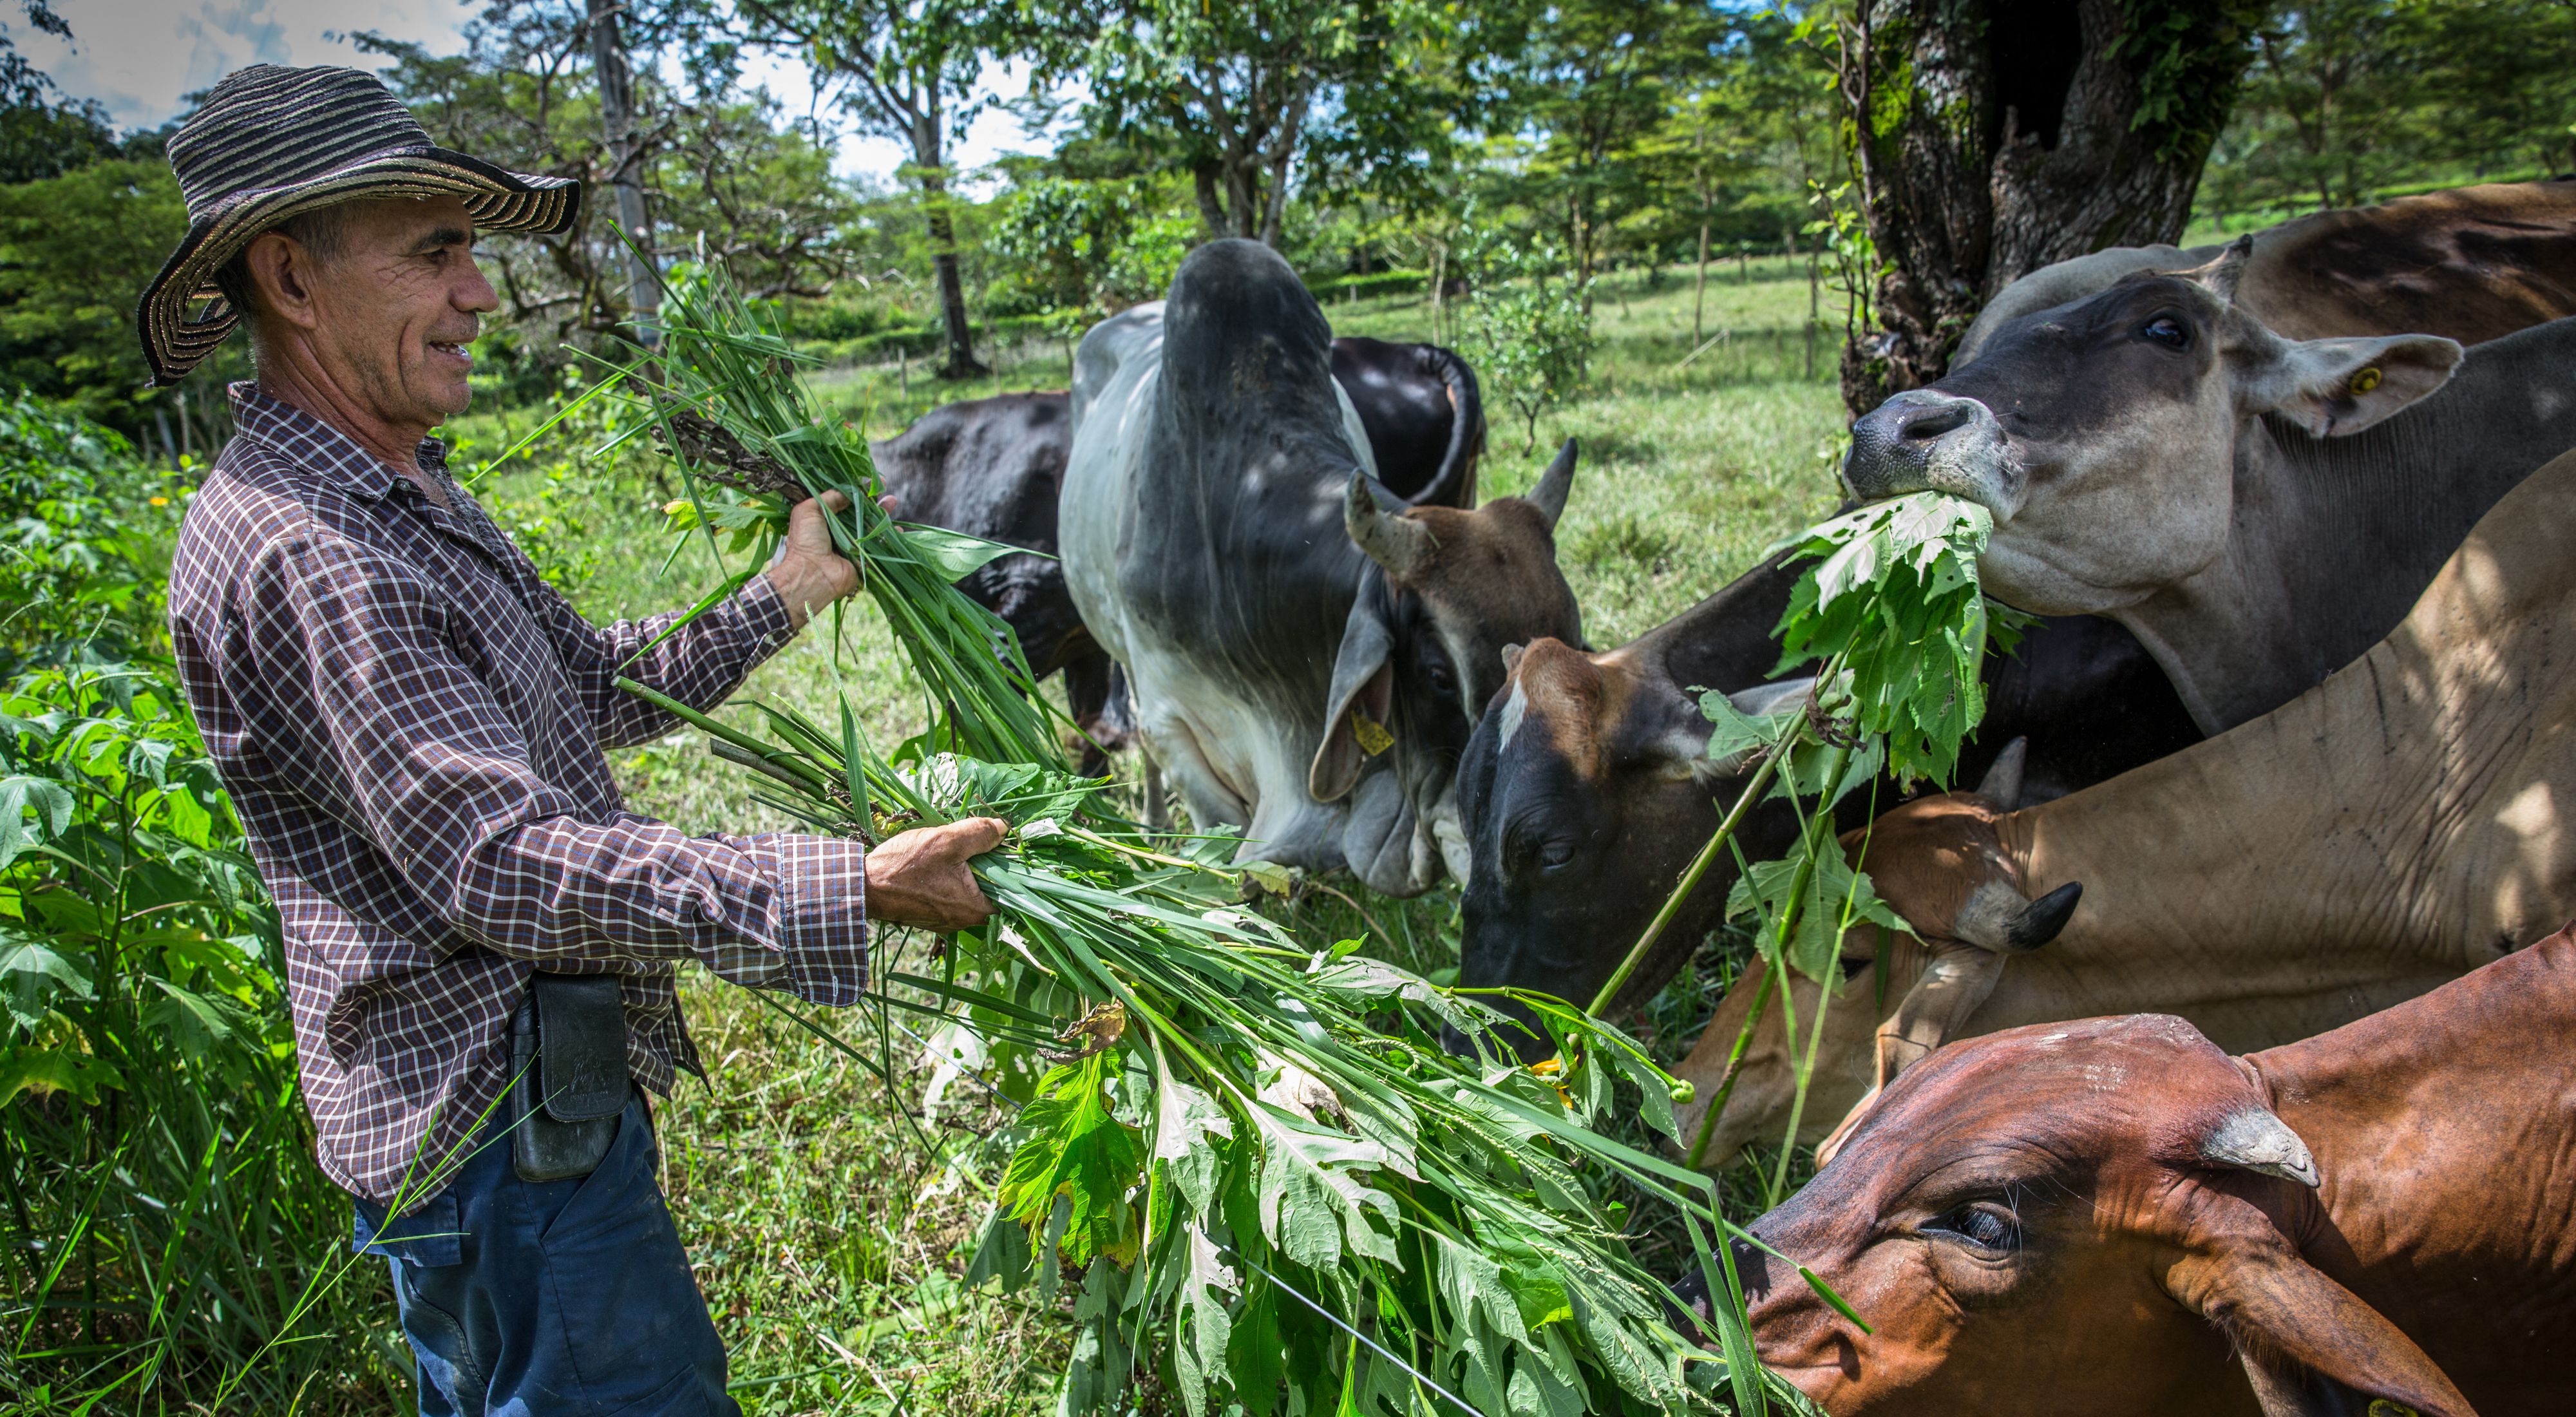 in Colombia produce more (and more nutritious) food while enhancing biodiversity, protecting natural habitats and reducing climate change impacts. 